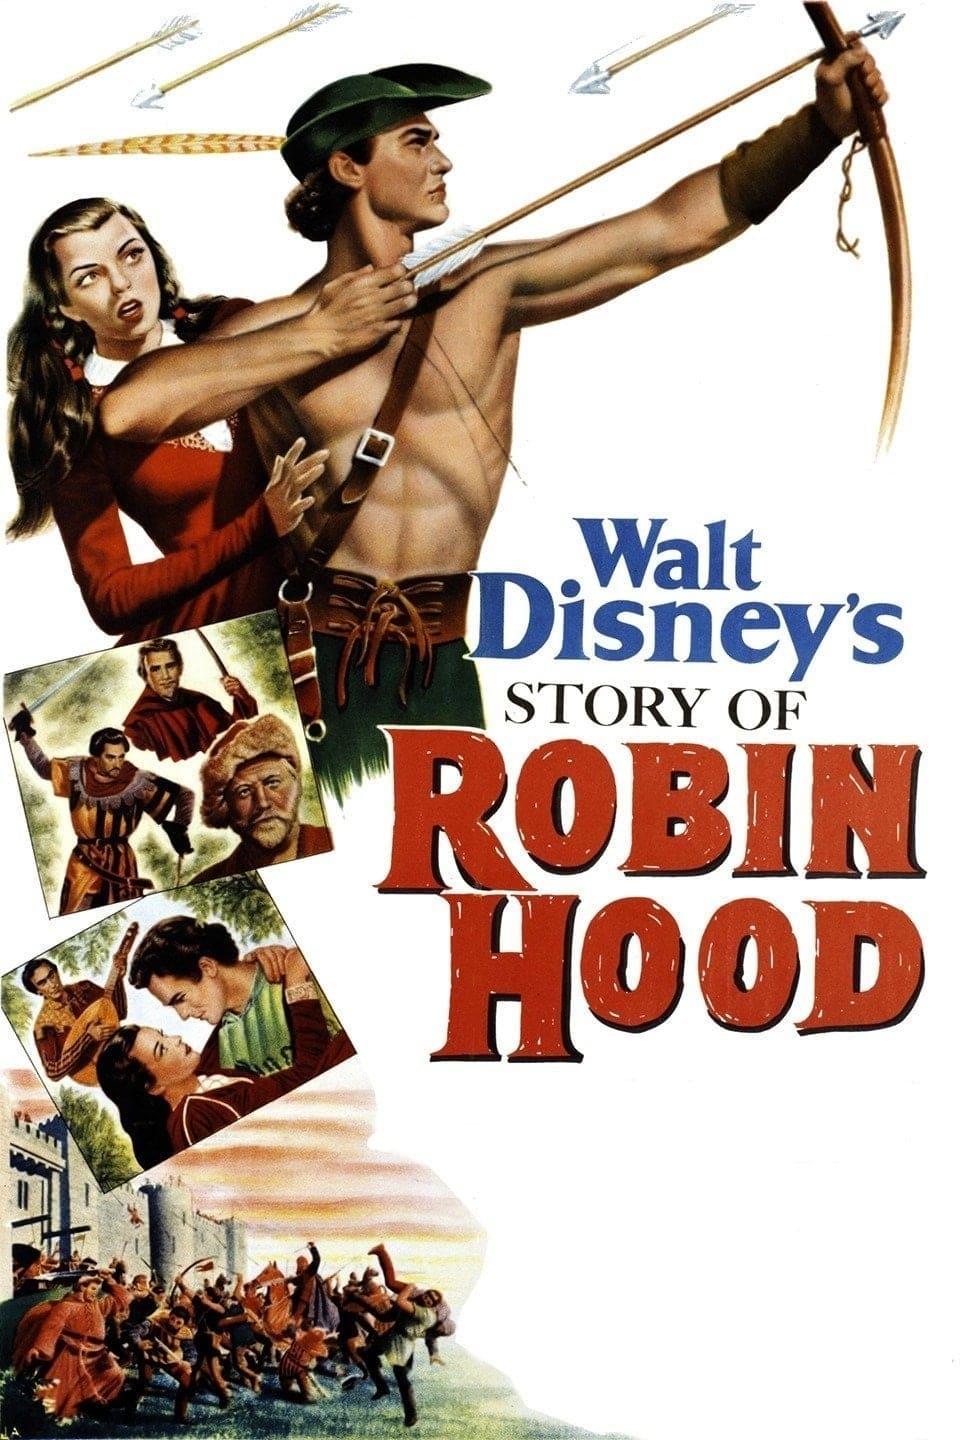 The Story of Robin Hood and His Merrie Men poster